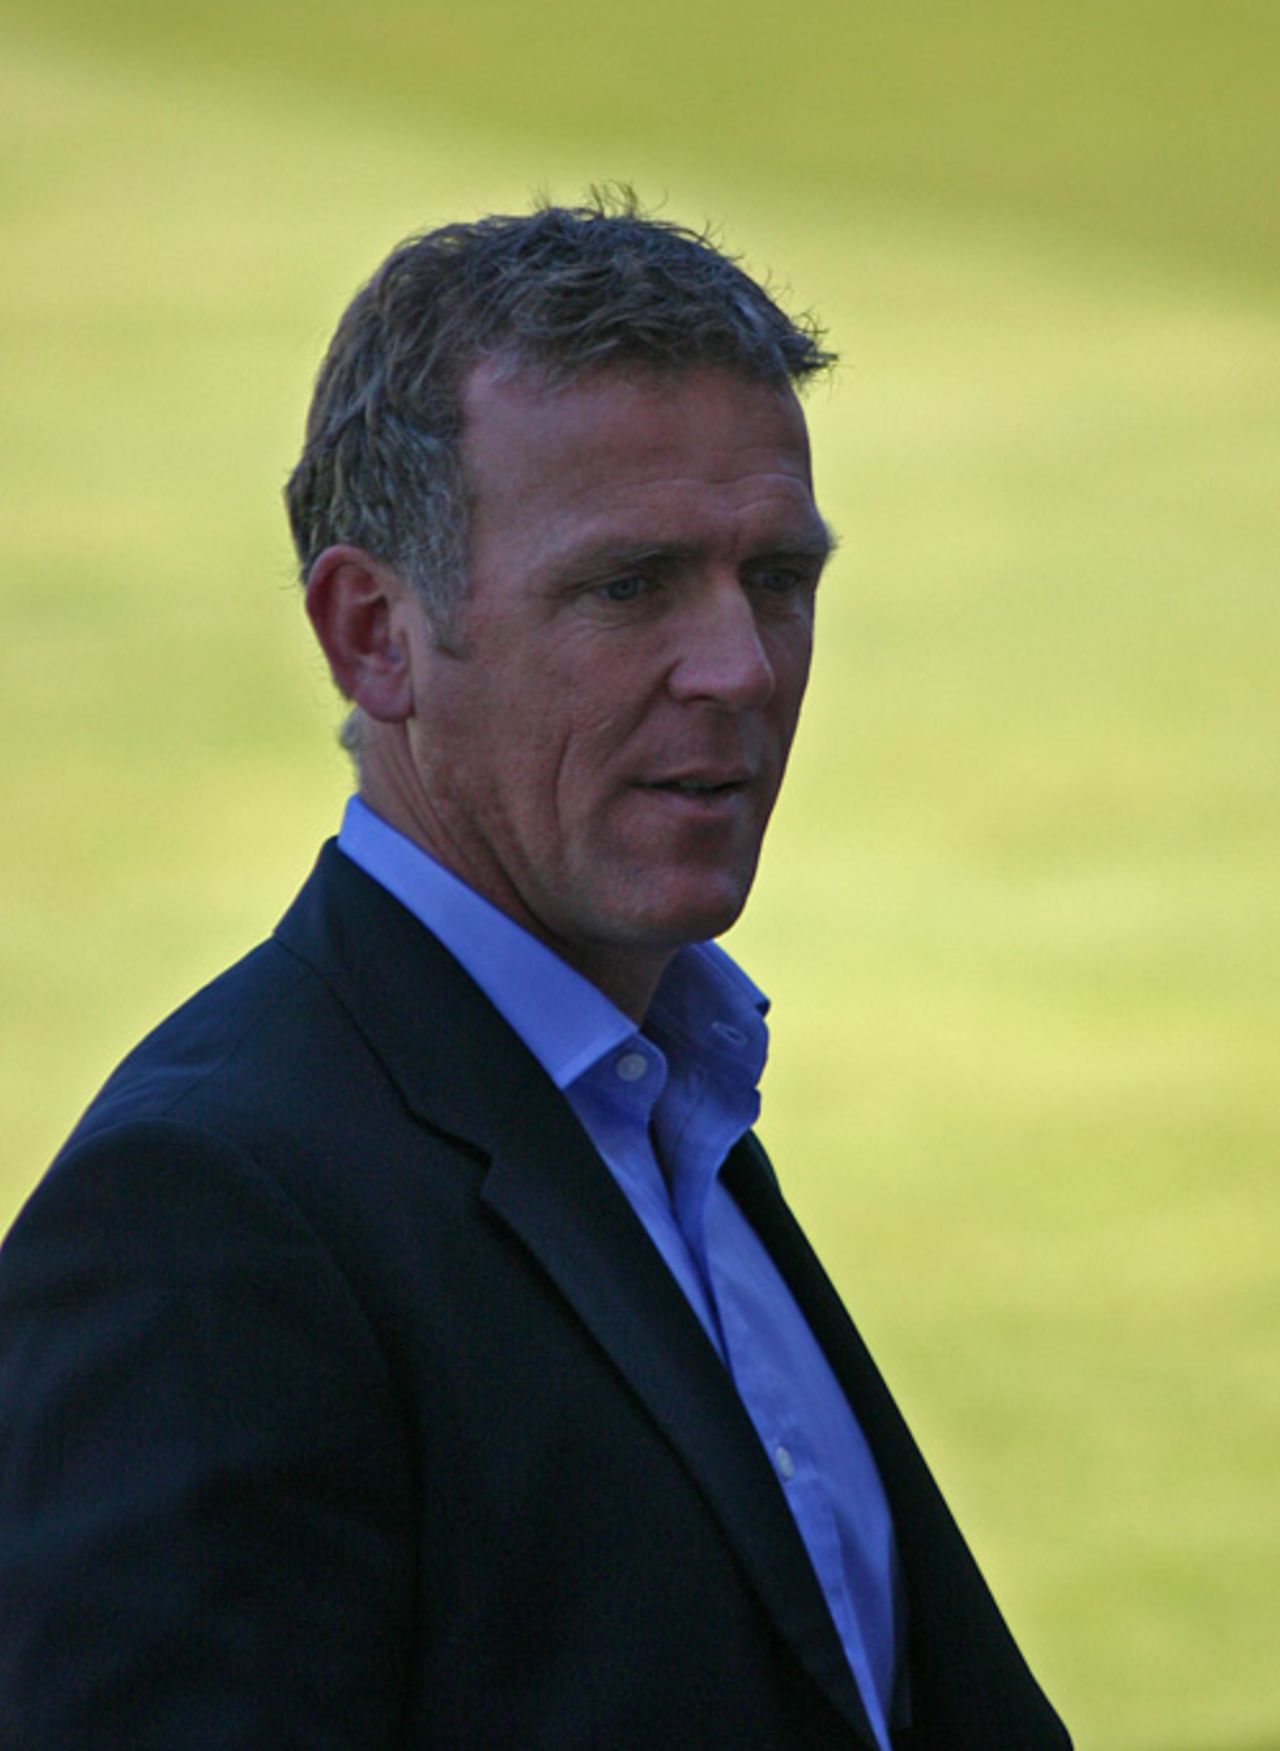 Alec Stewart watches his old side take on Yorkshire, Surrey v Yorkshire, County Championship Division One, The Oval, April 19, 2007